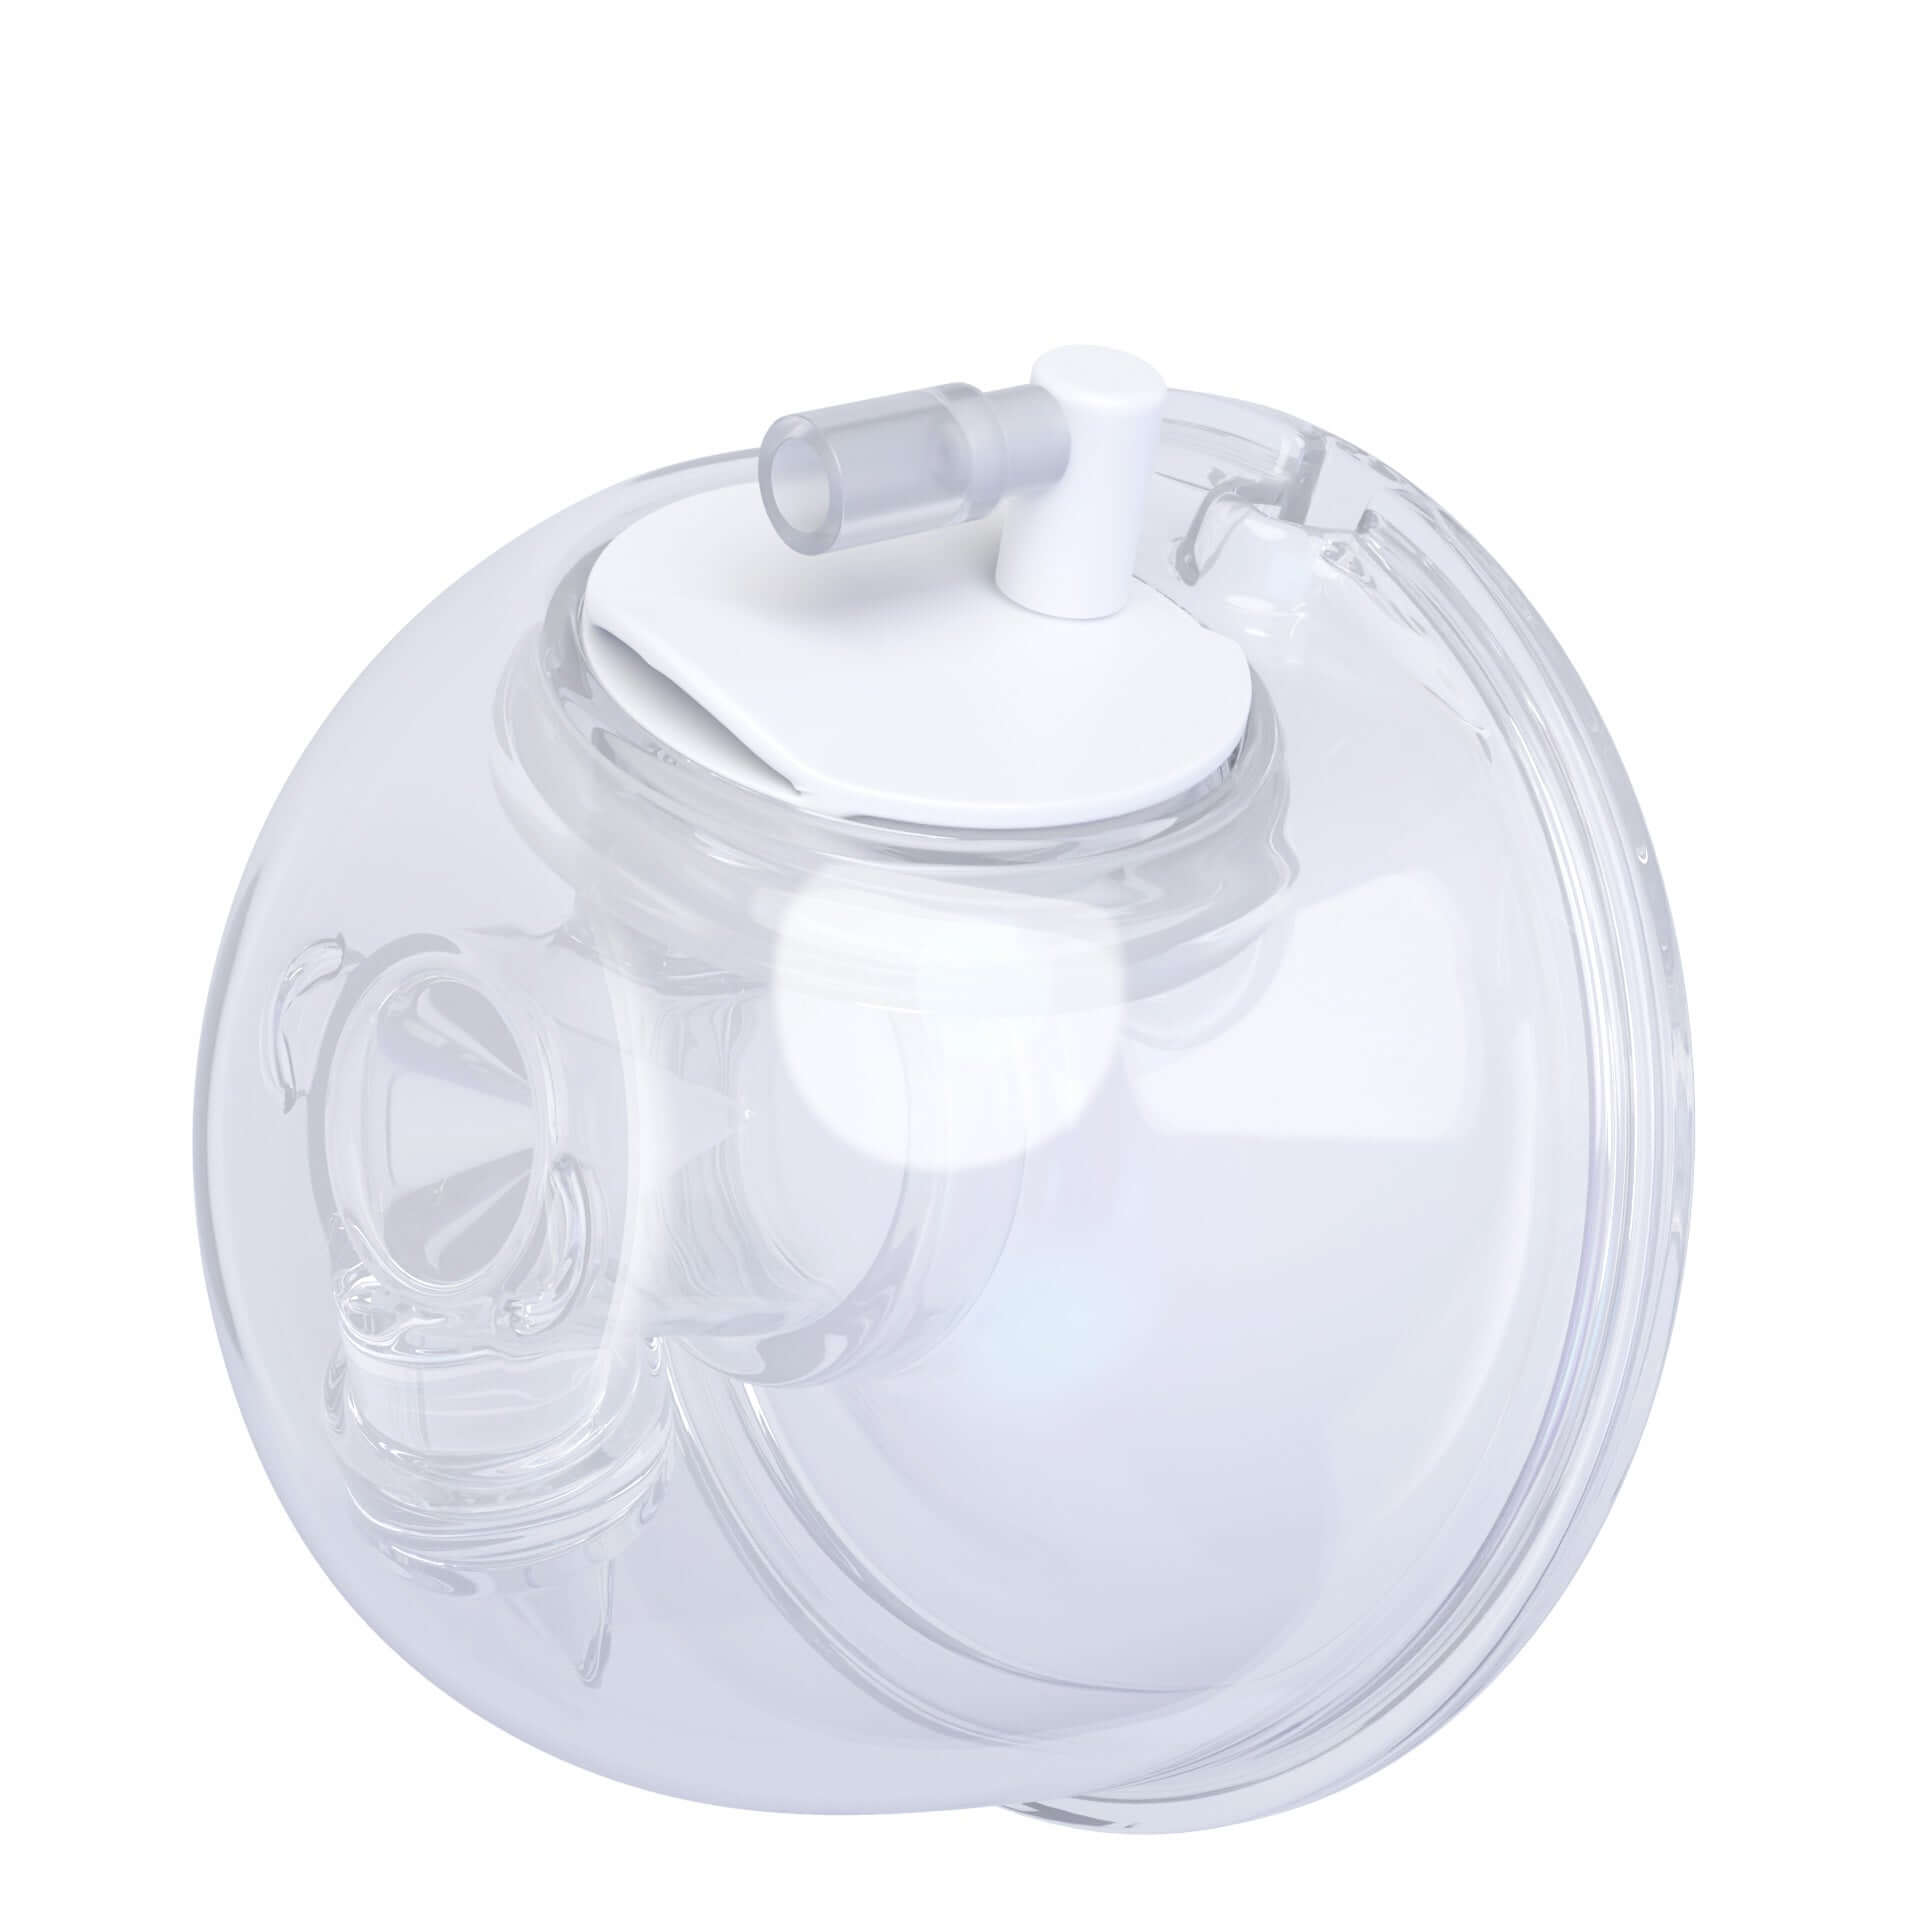 assembled idaho jones pump-a-collect breast milk collection cup